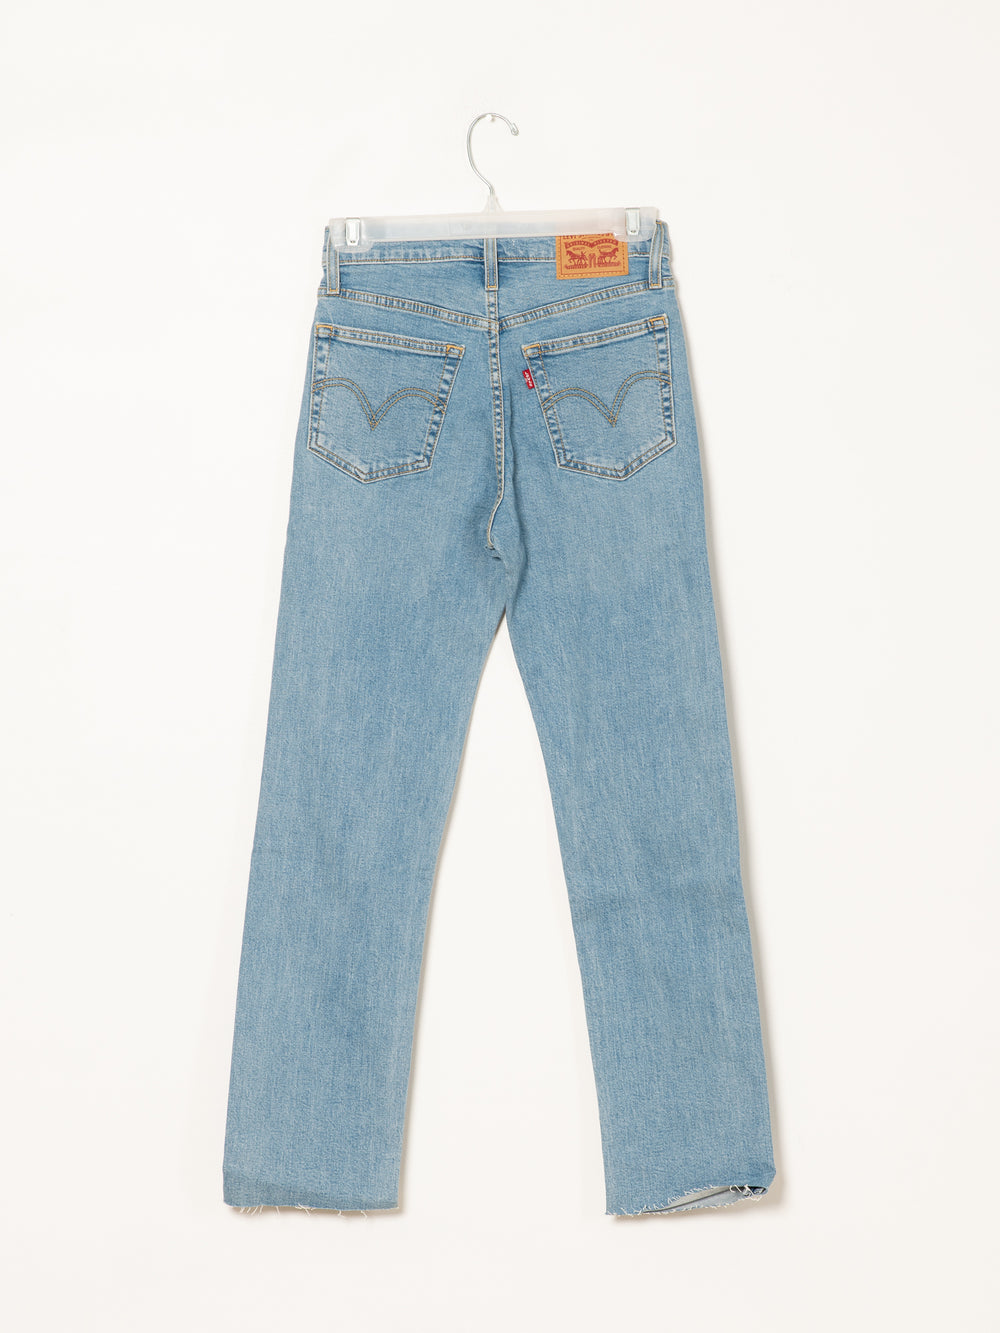 LEVIS WEDGIE STRAIGHT JEAN - CLEARANCE